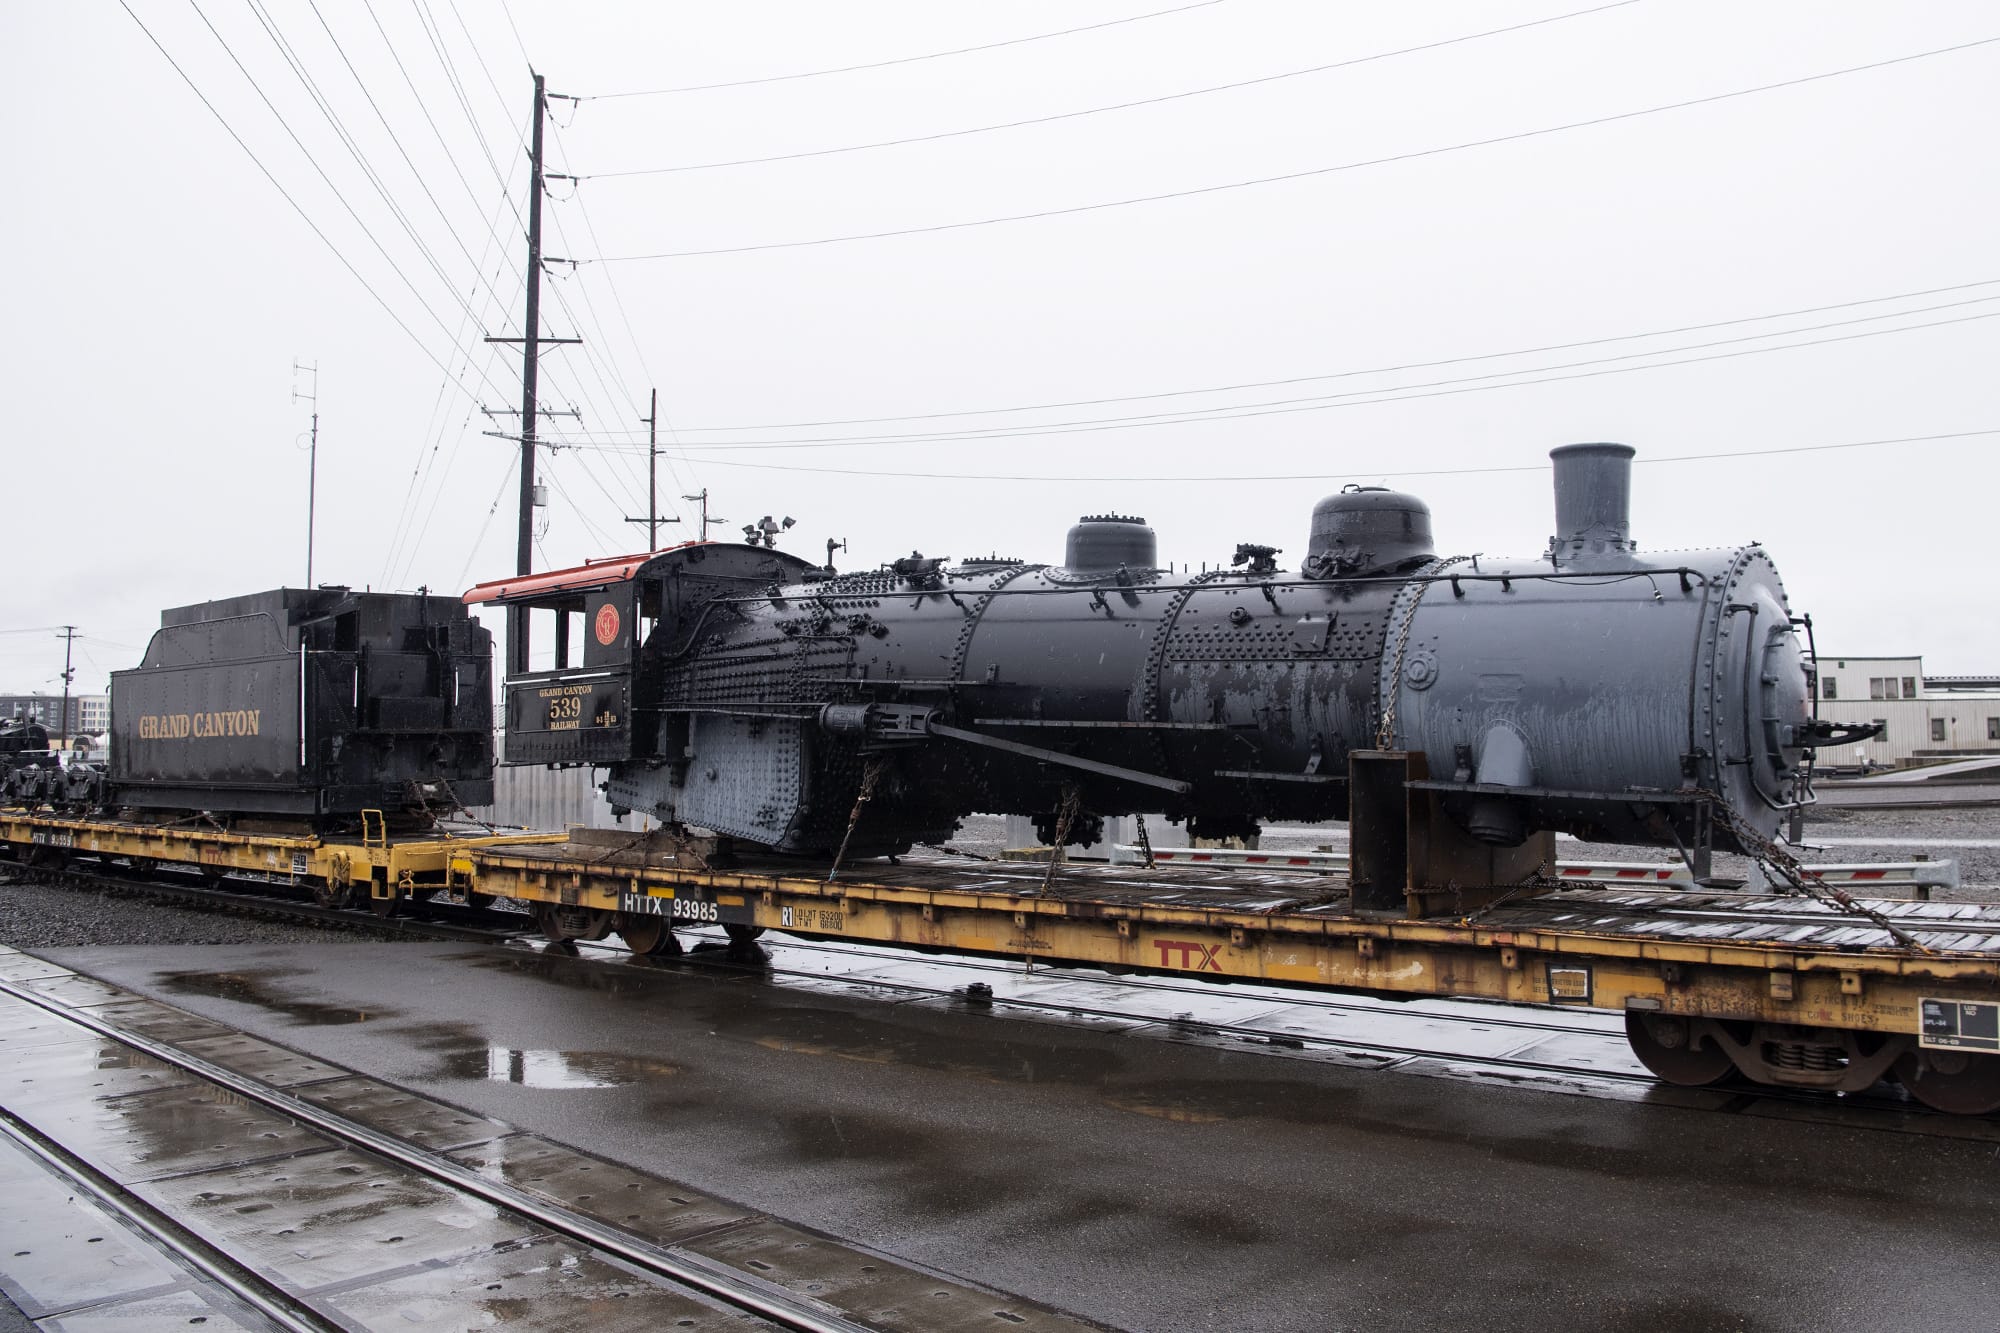 A vintage steam locomotive, the SP&amp;S 539, runs through Vancouver on itÕs route from the Grand Canyon to its future home at the Port of Kalama on March 6, 2020. The vintage locomotive spent 40 years in Esther Short Park before it was removed 20 years ago as part of the park's renovation.